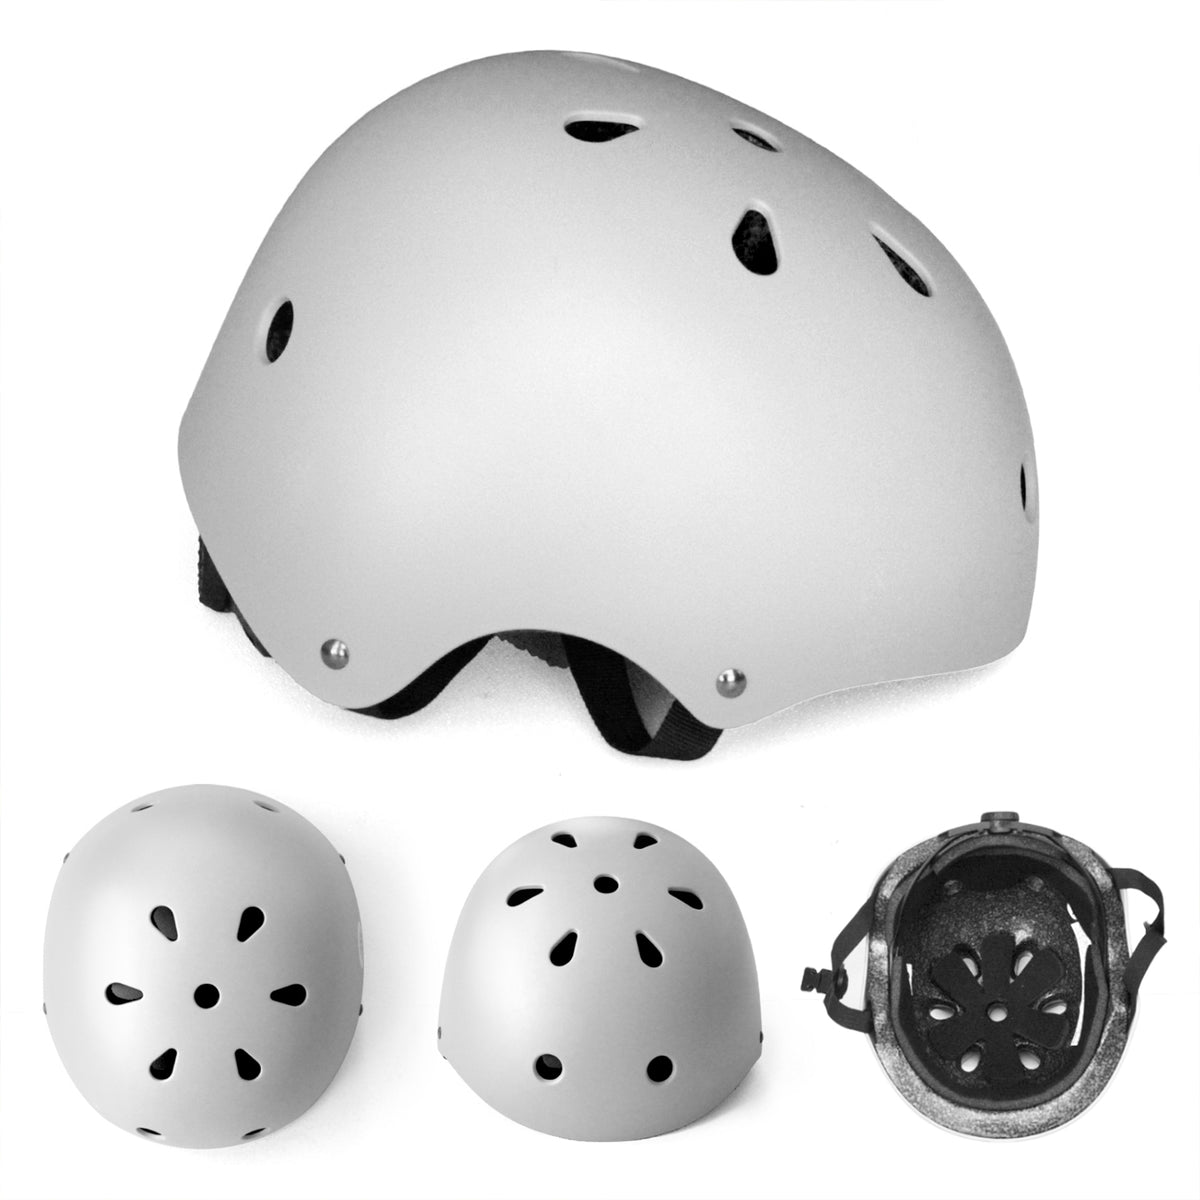 67i Silver Adult Helmet In Stock USA